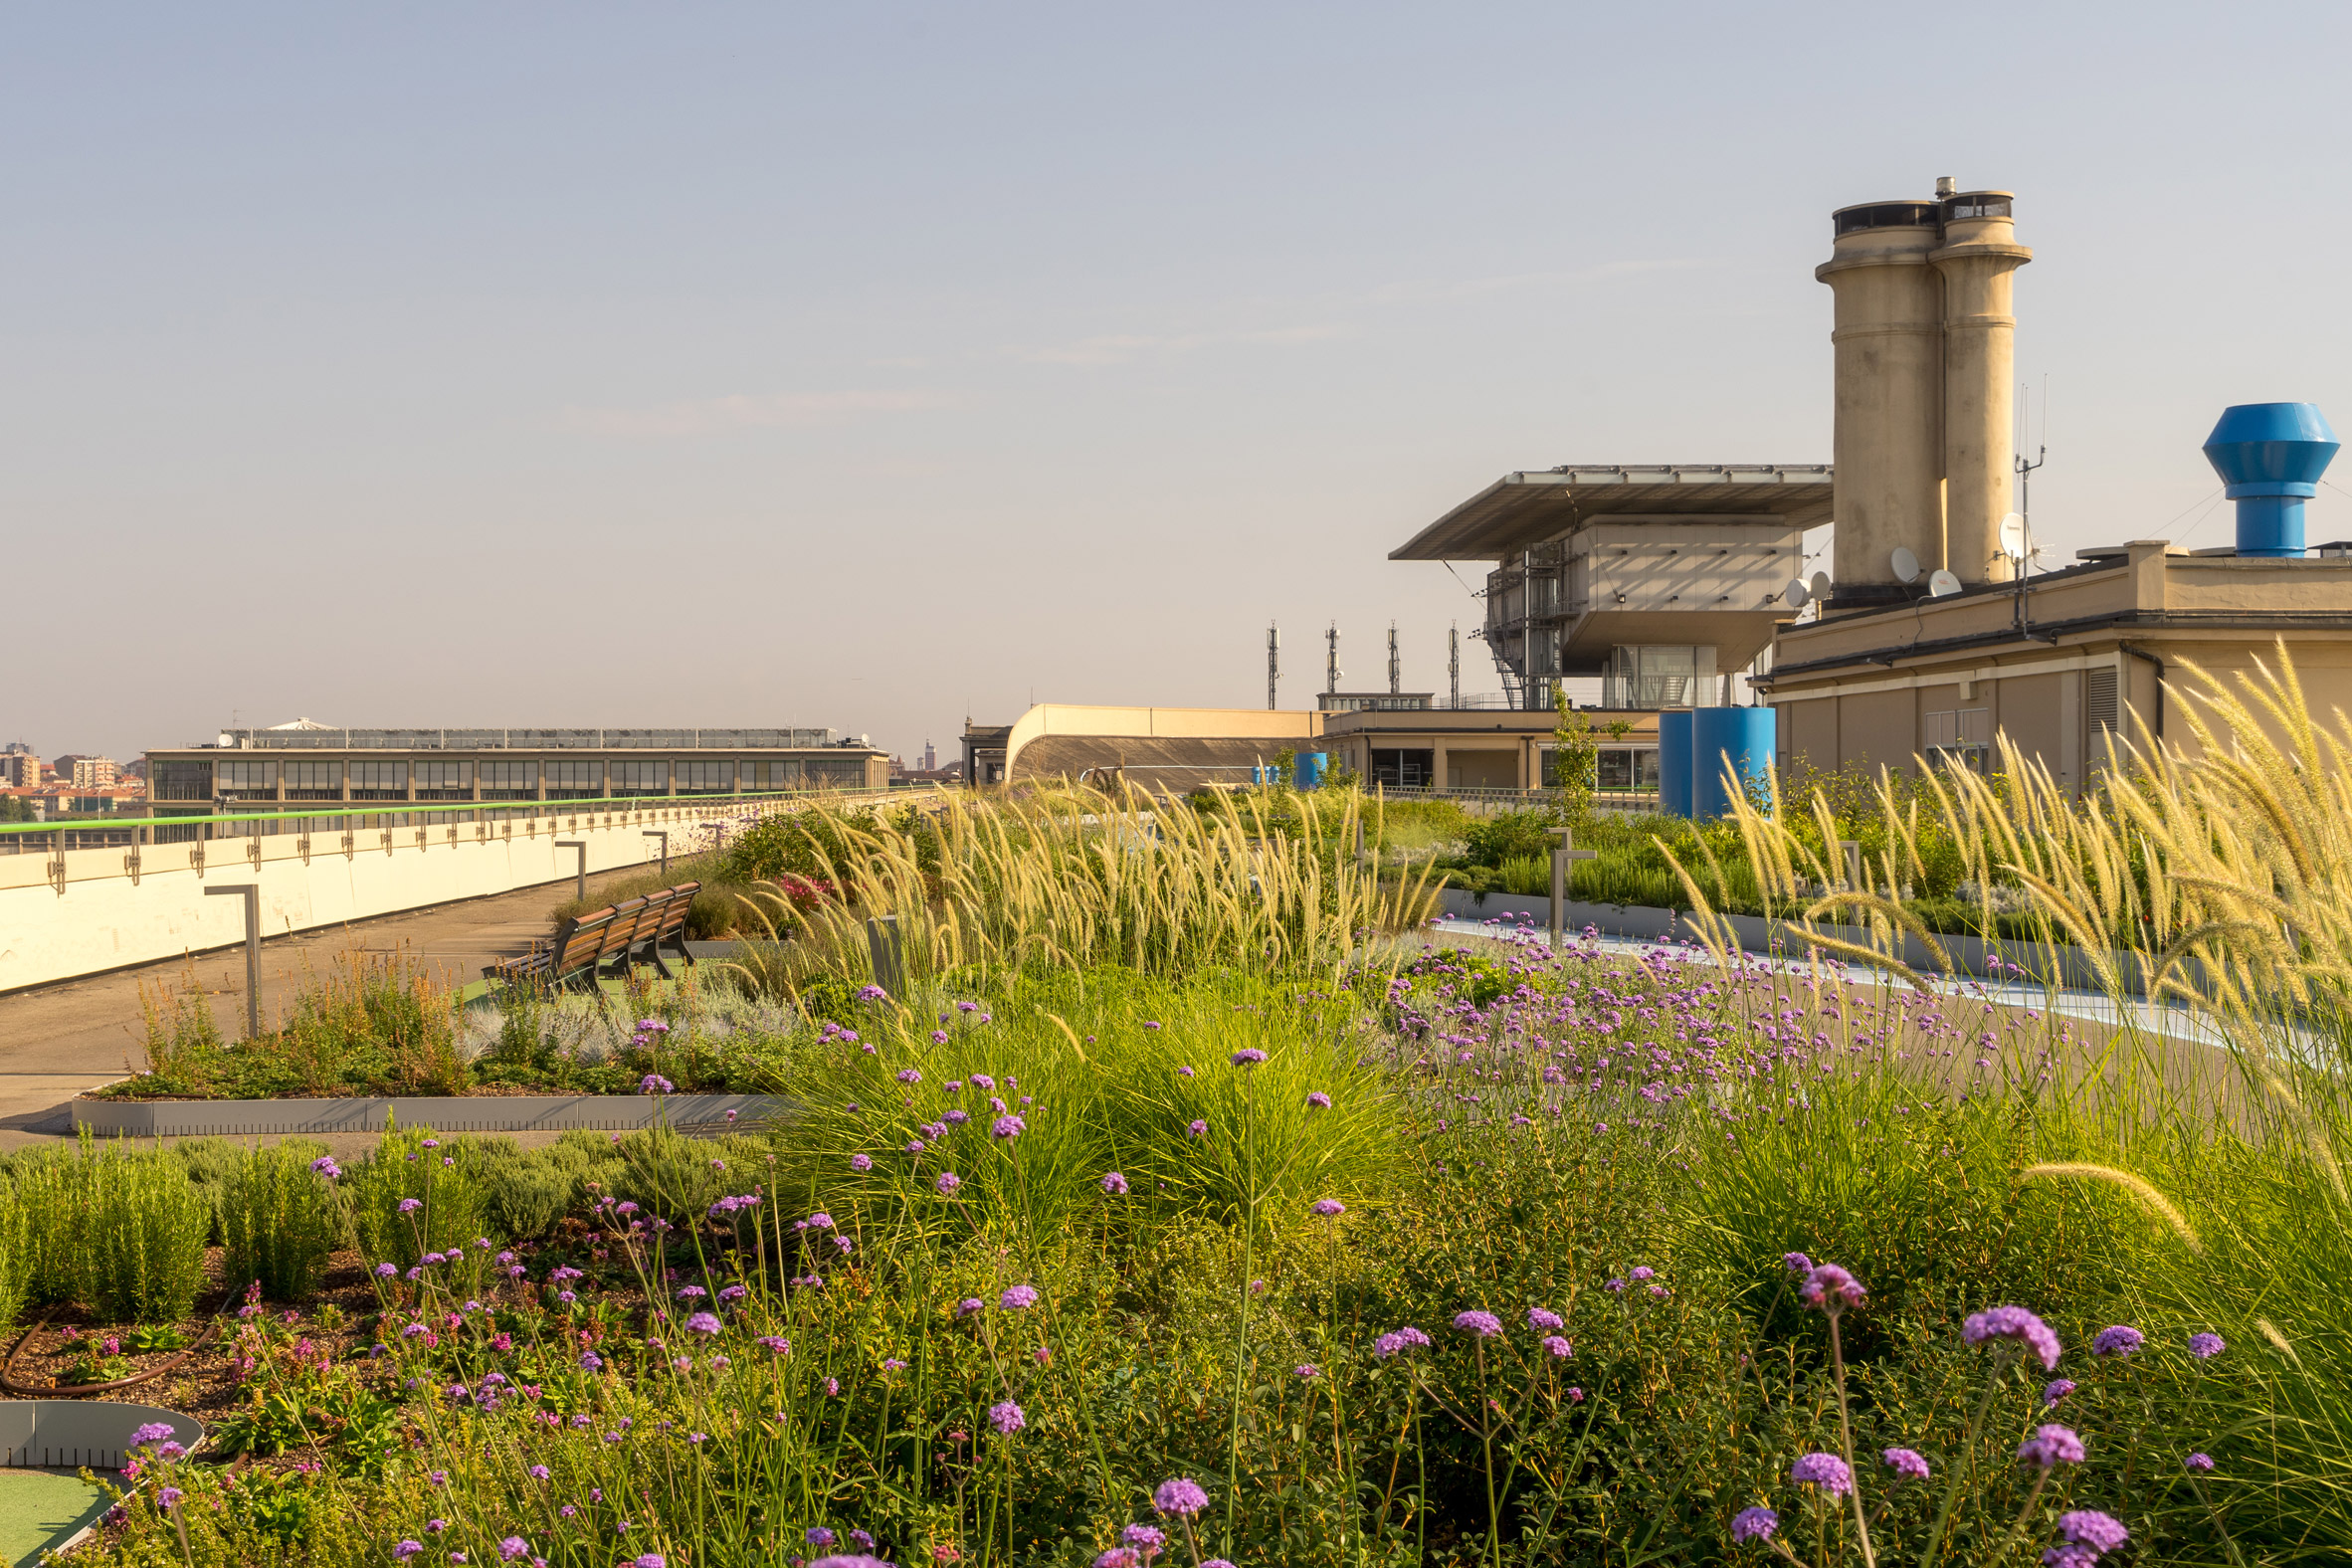 Perennials and grasses are housed in the planters on the Lingotto building's test track